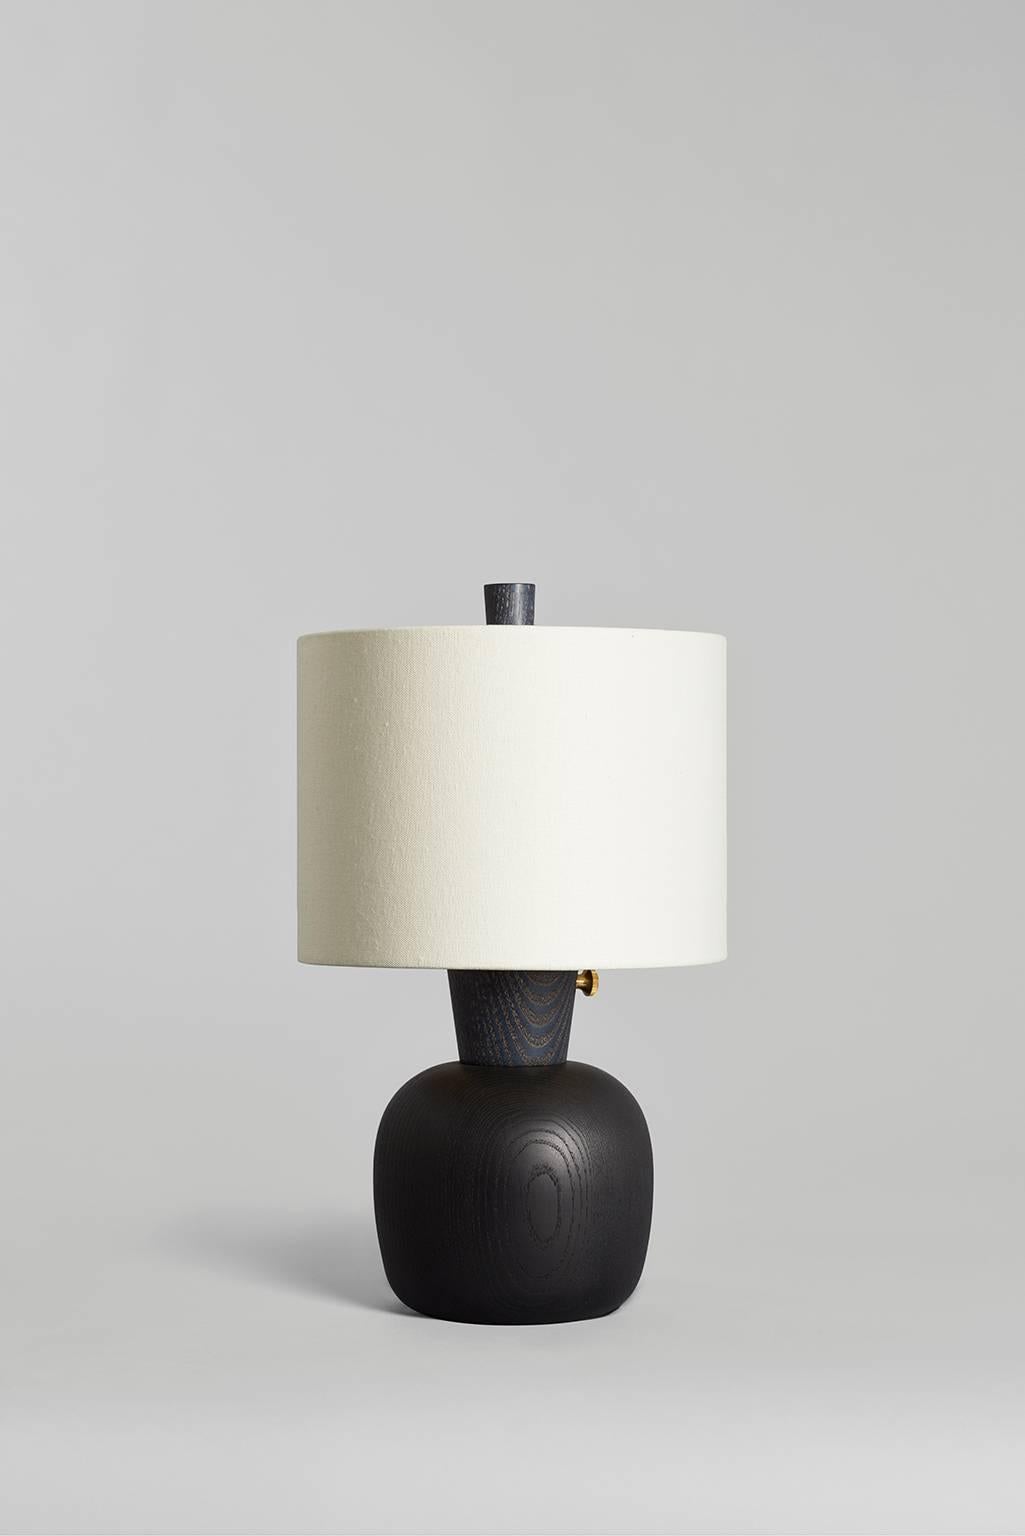 Small with a big presence, the Marty inhabits intimate spaces, scaled for the bedside or tabletop. This model has a matte black surface inspired by satin black hot rod paint jobs. Turned, maple base with matte black finish and navy blue neck and